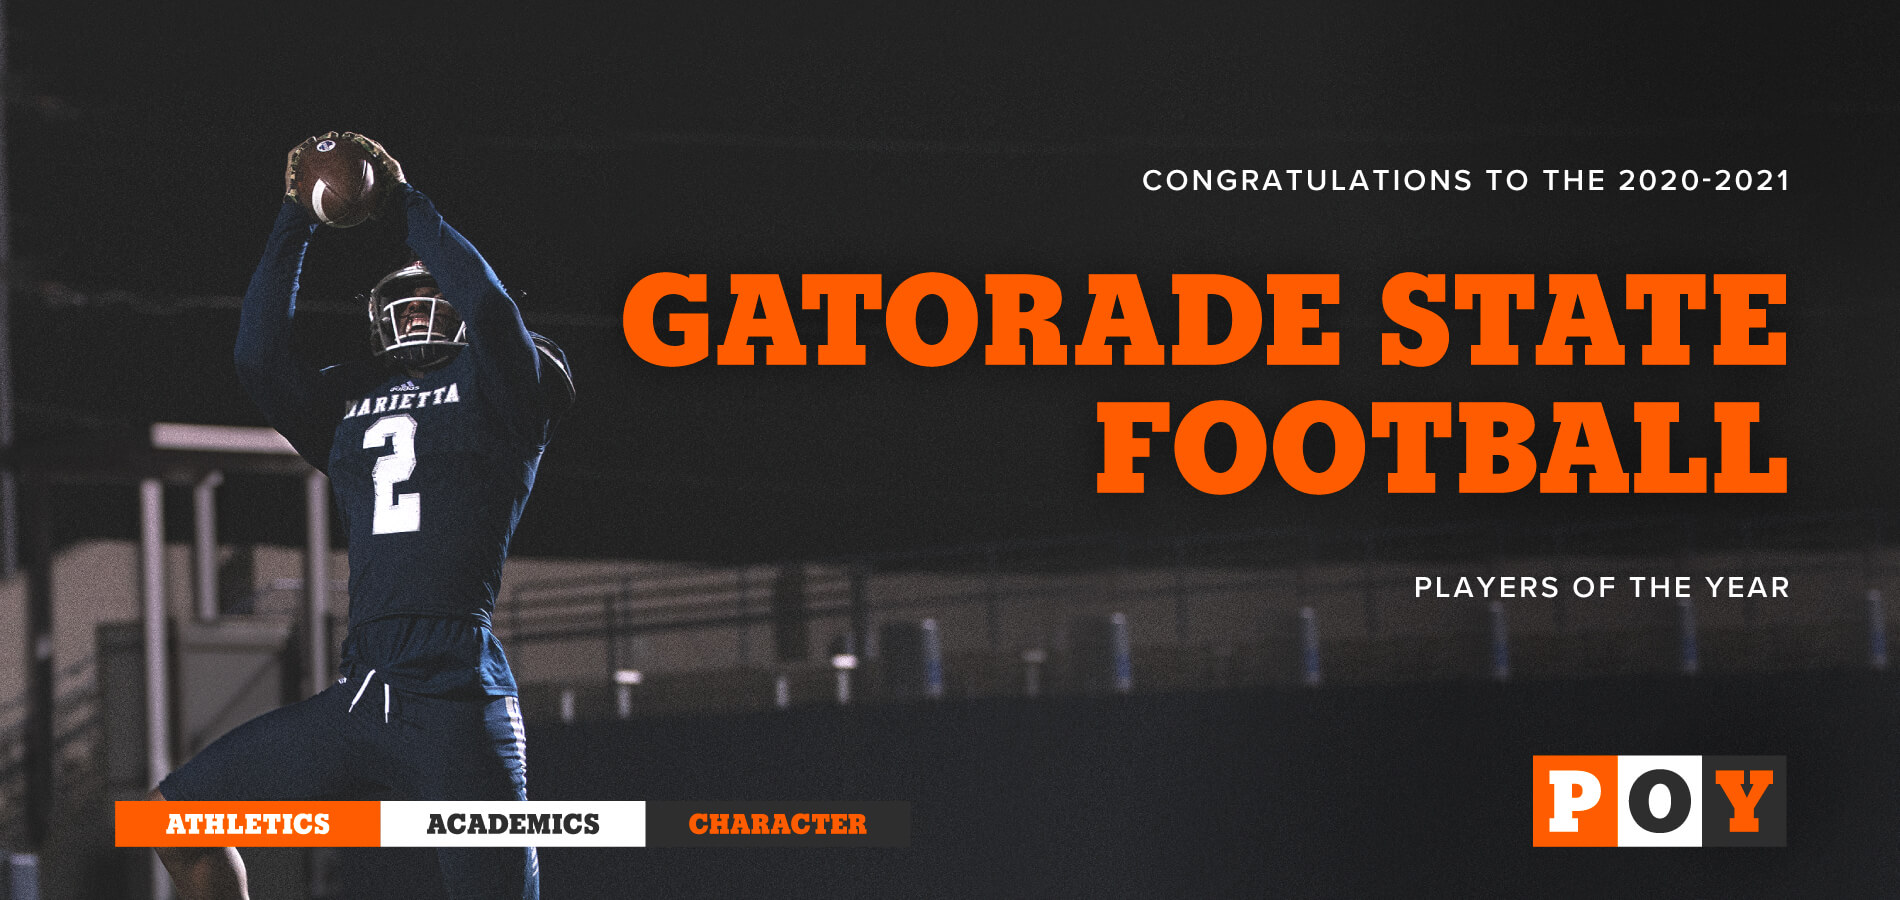 Gatorade Player of the Year Honoring Athletic Excellence, Academic